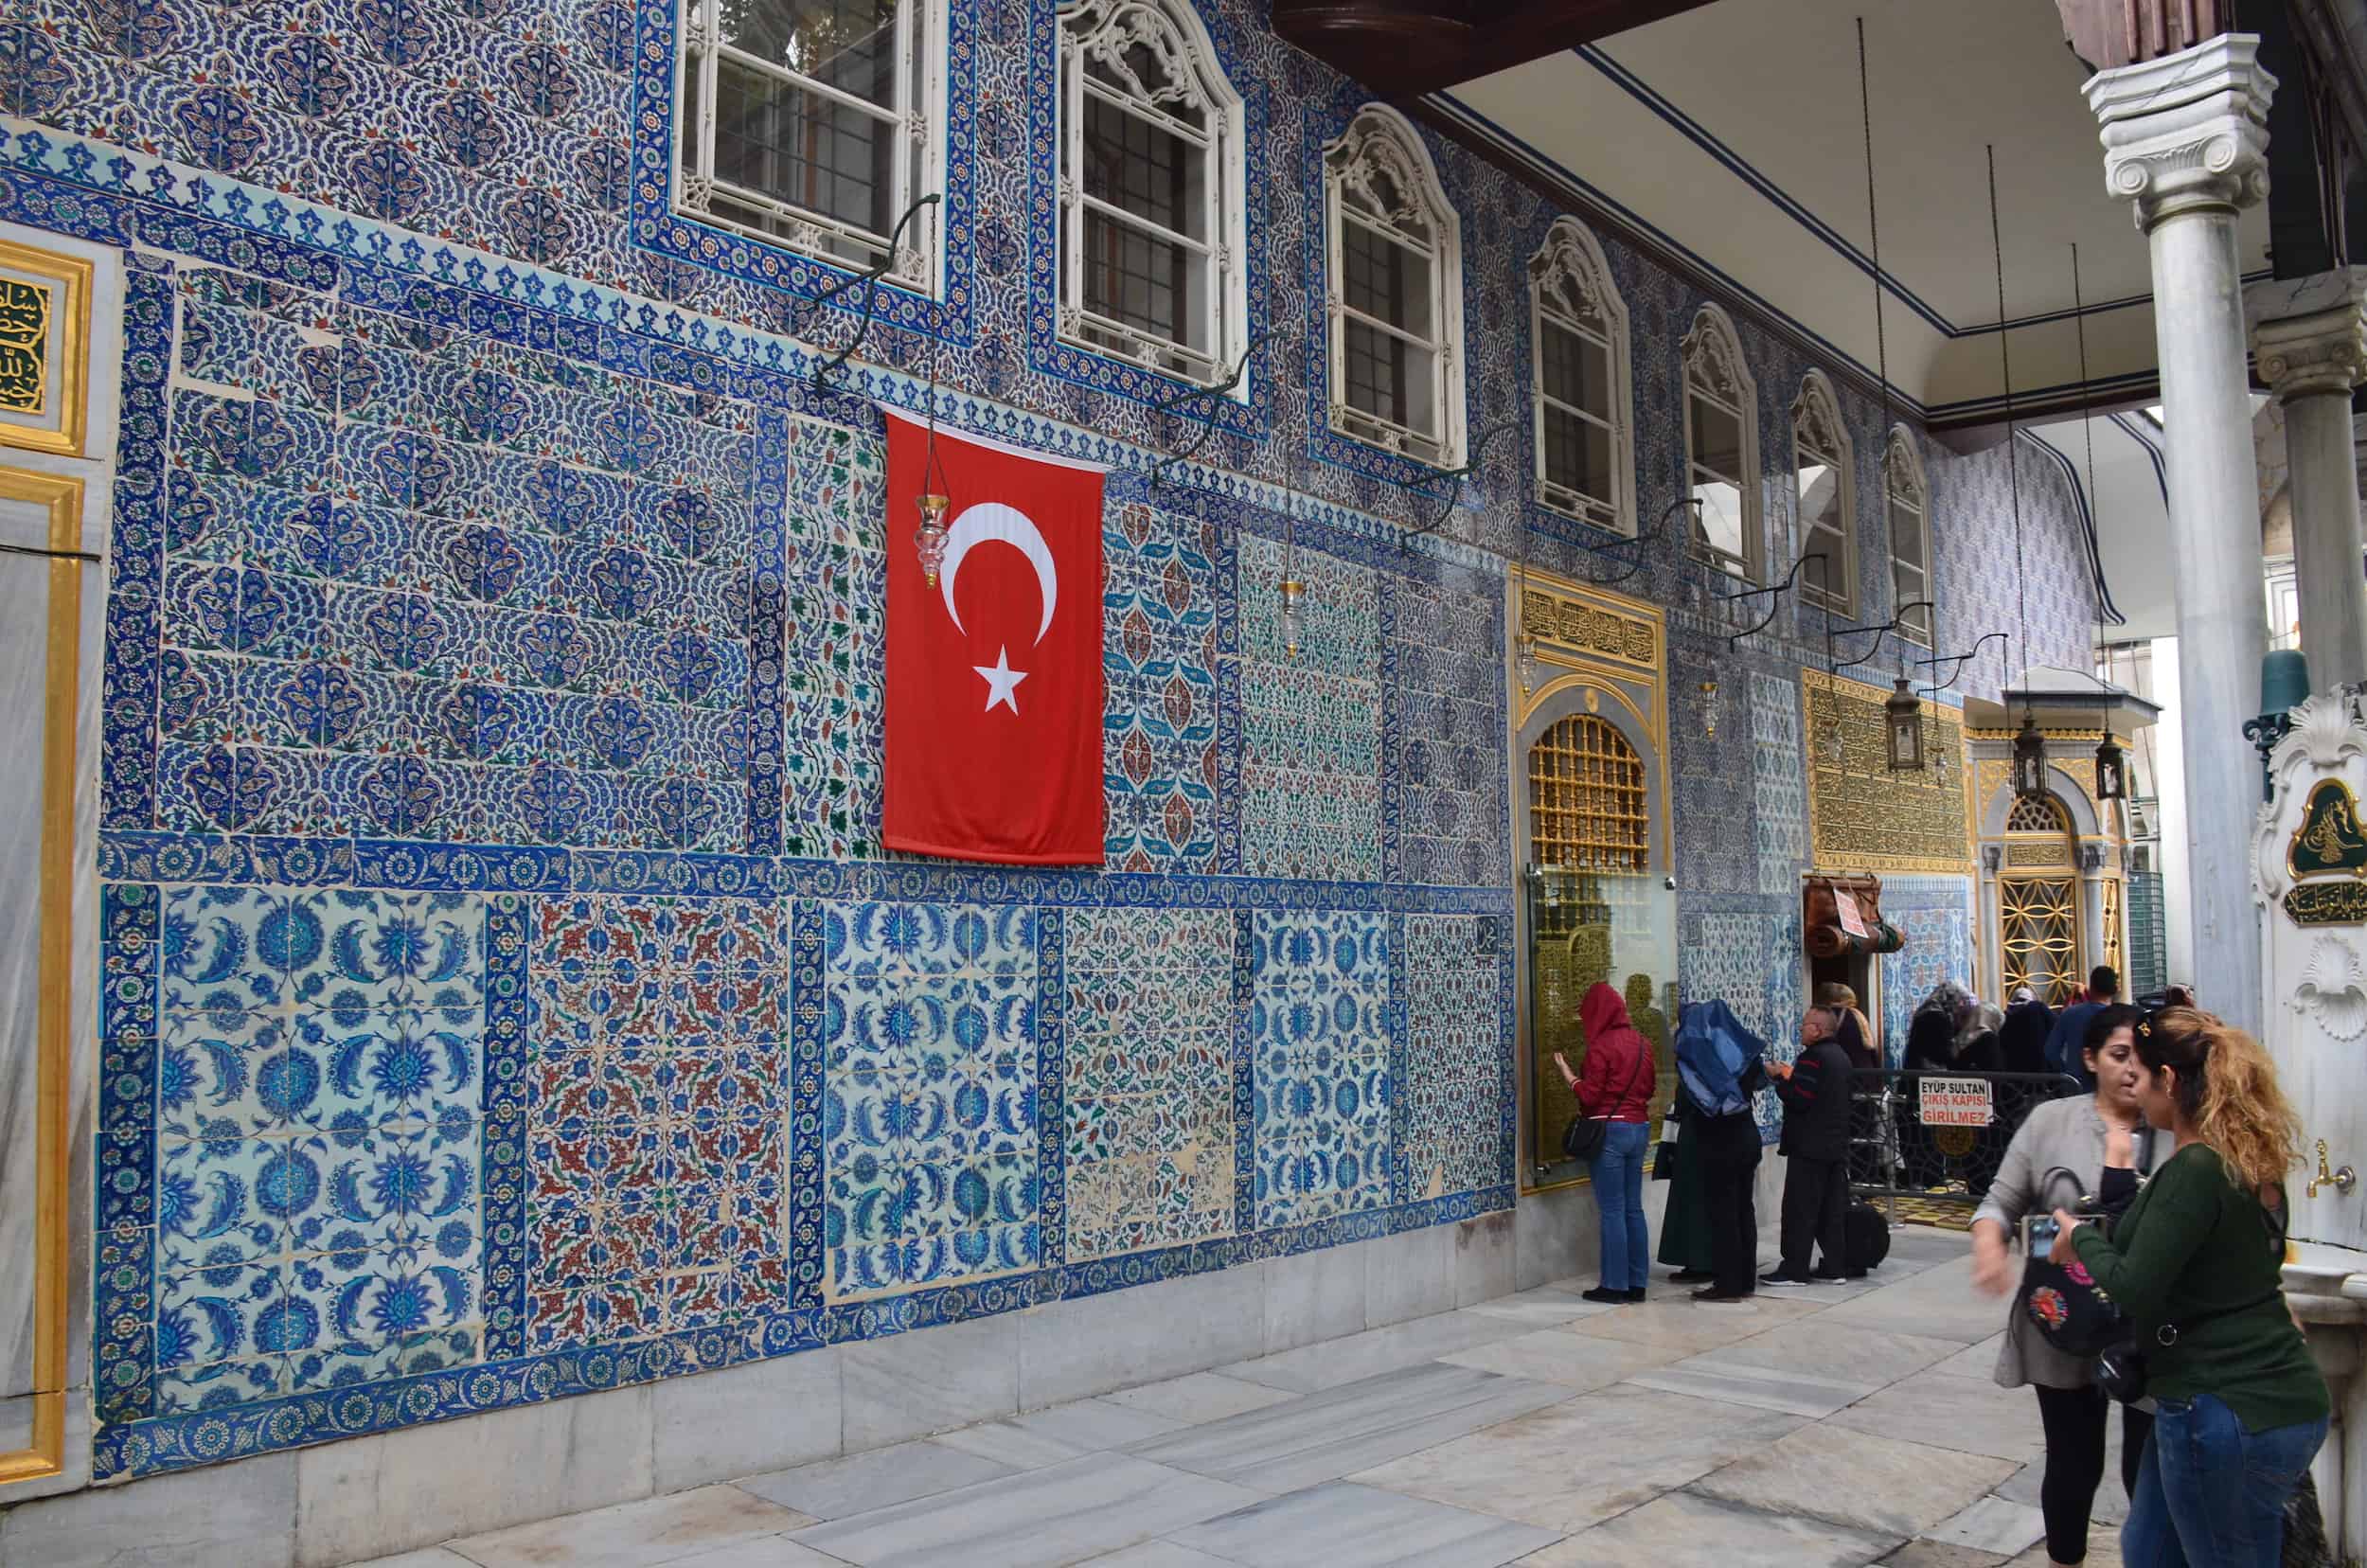 Tiles on the tomb of Abu Ayub al-Ansari from the inner courtyard at Eyüp Sultan Mosque in Istanbul, Turkey